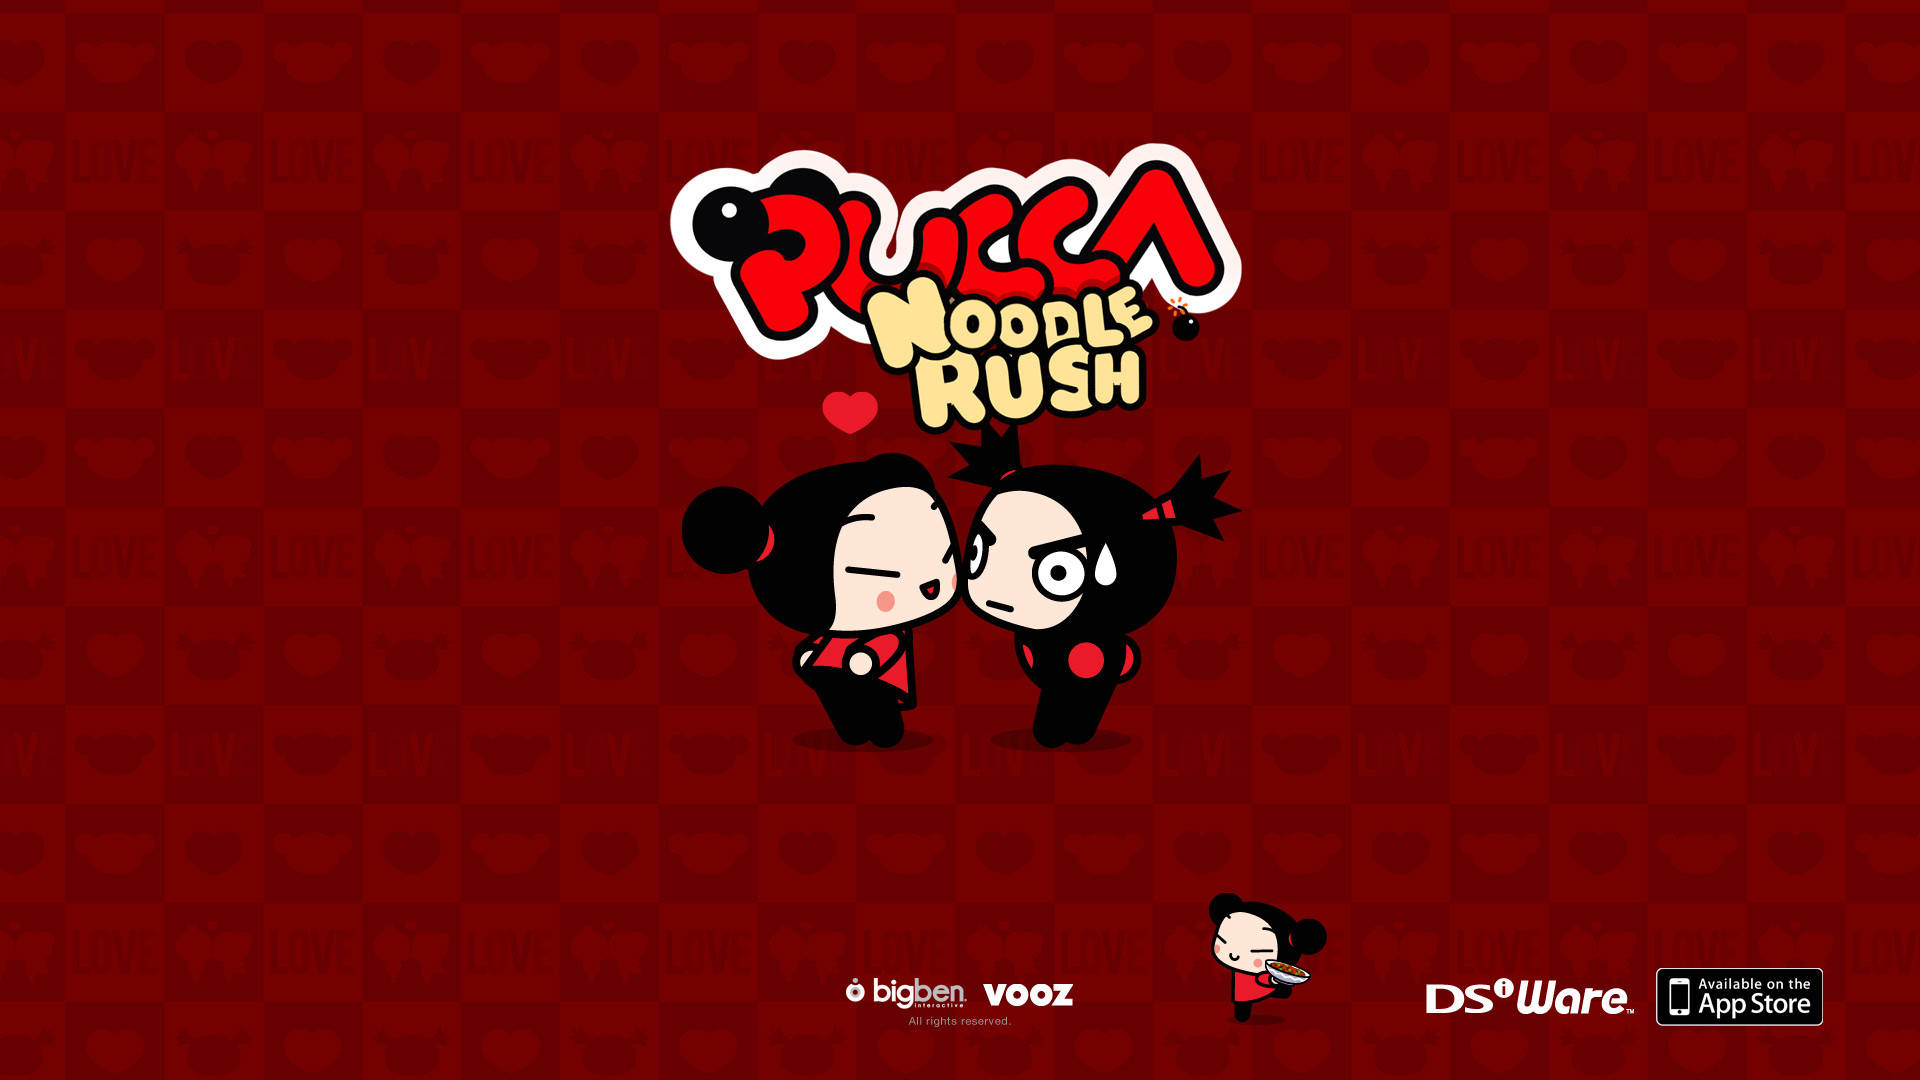 Pucca Noodle Rush Promotional Poster Background